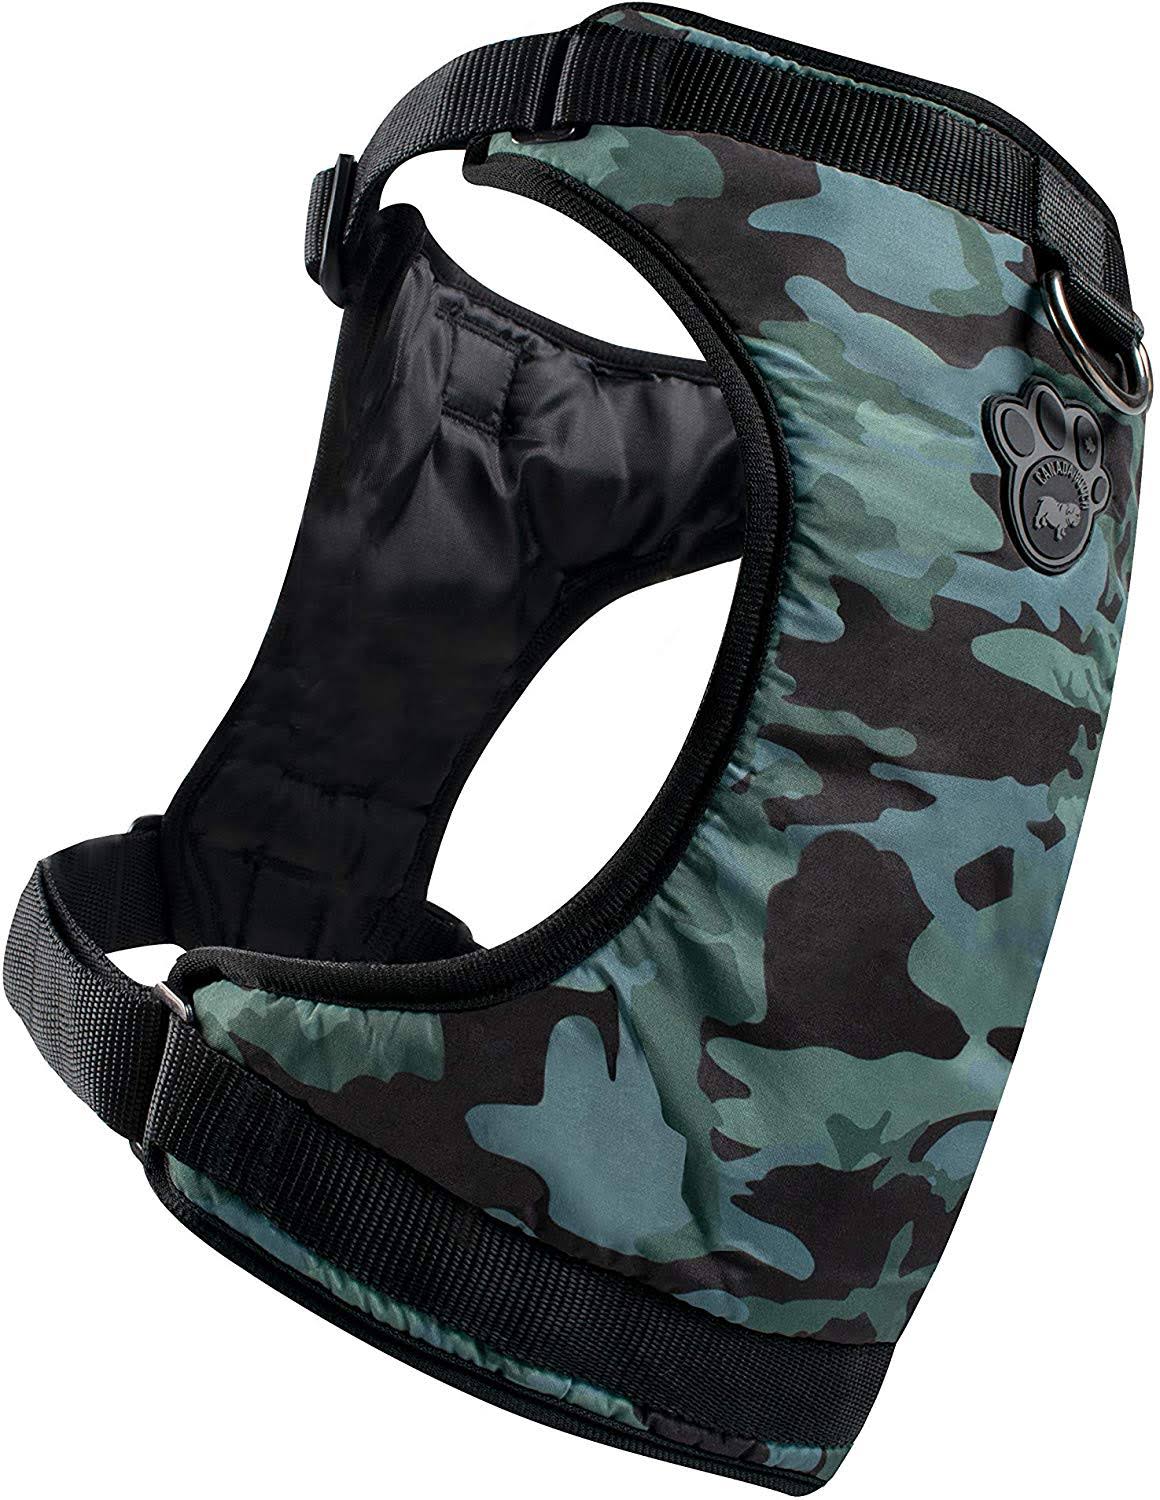 Canada Pooch The Everything Water-Resistant Dog Harness, Camo, Medium